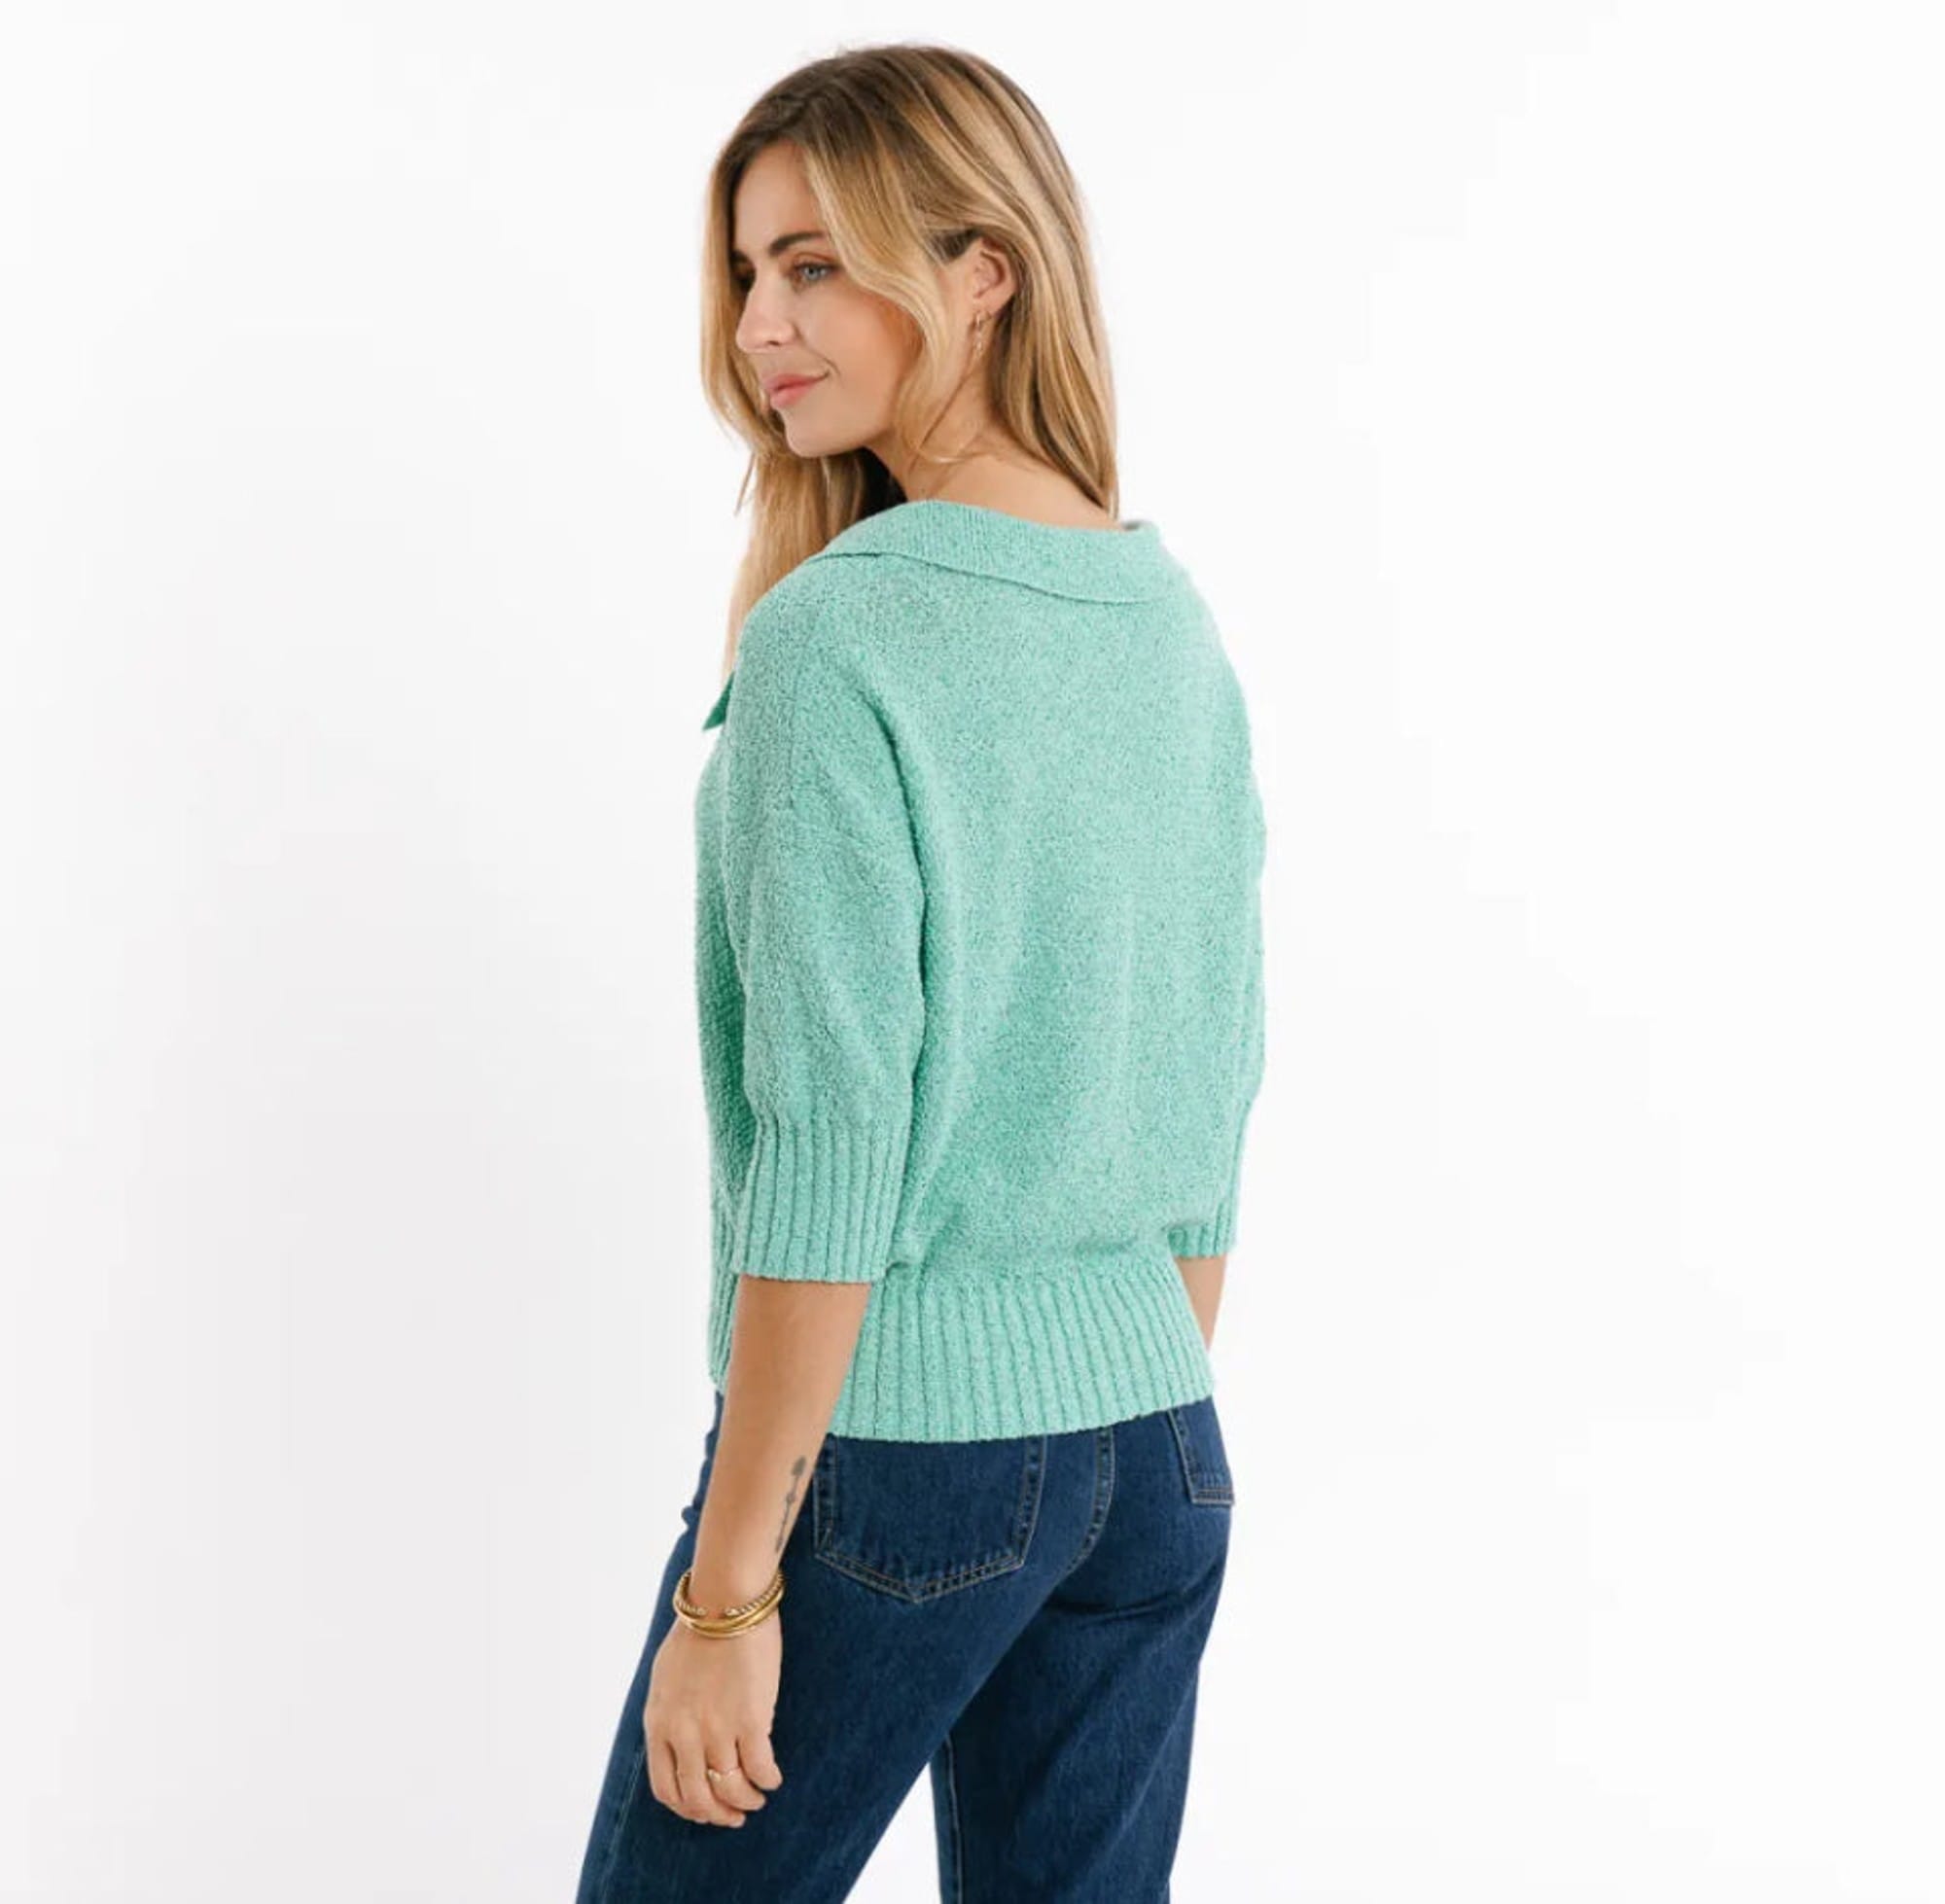 Sweewe Paris Mint Sweater - clever alice